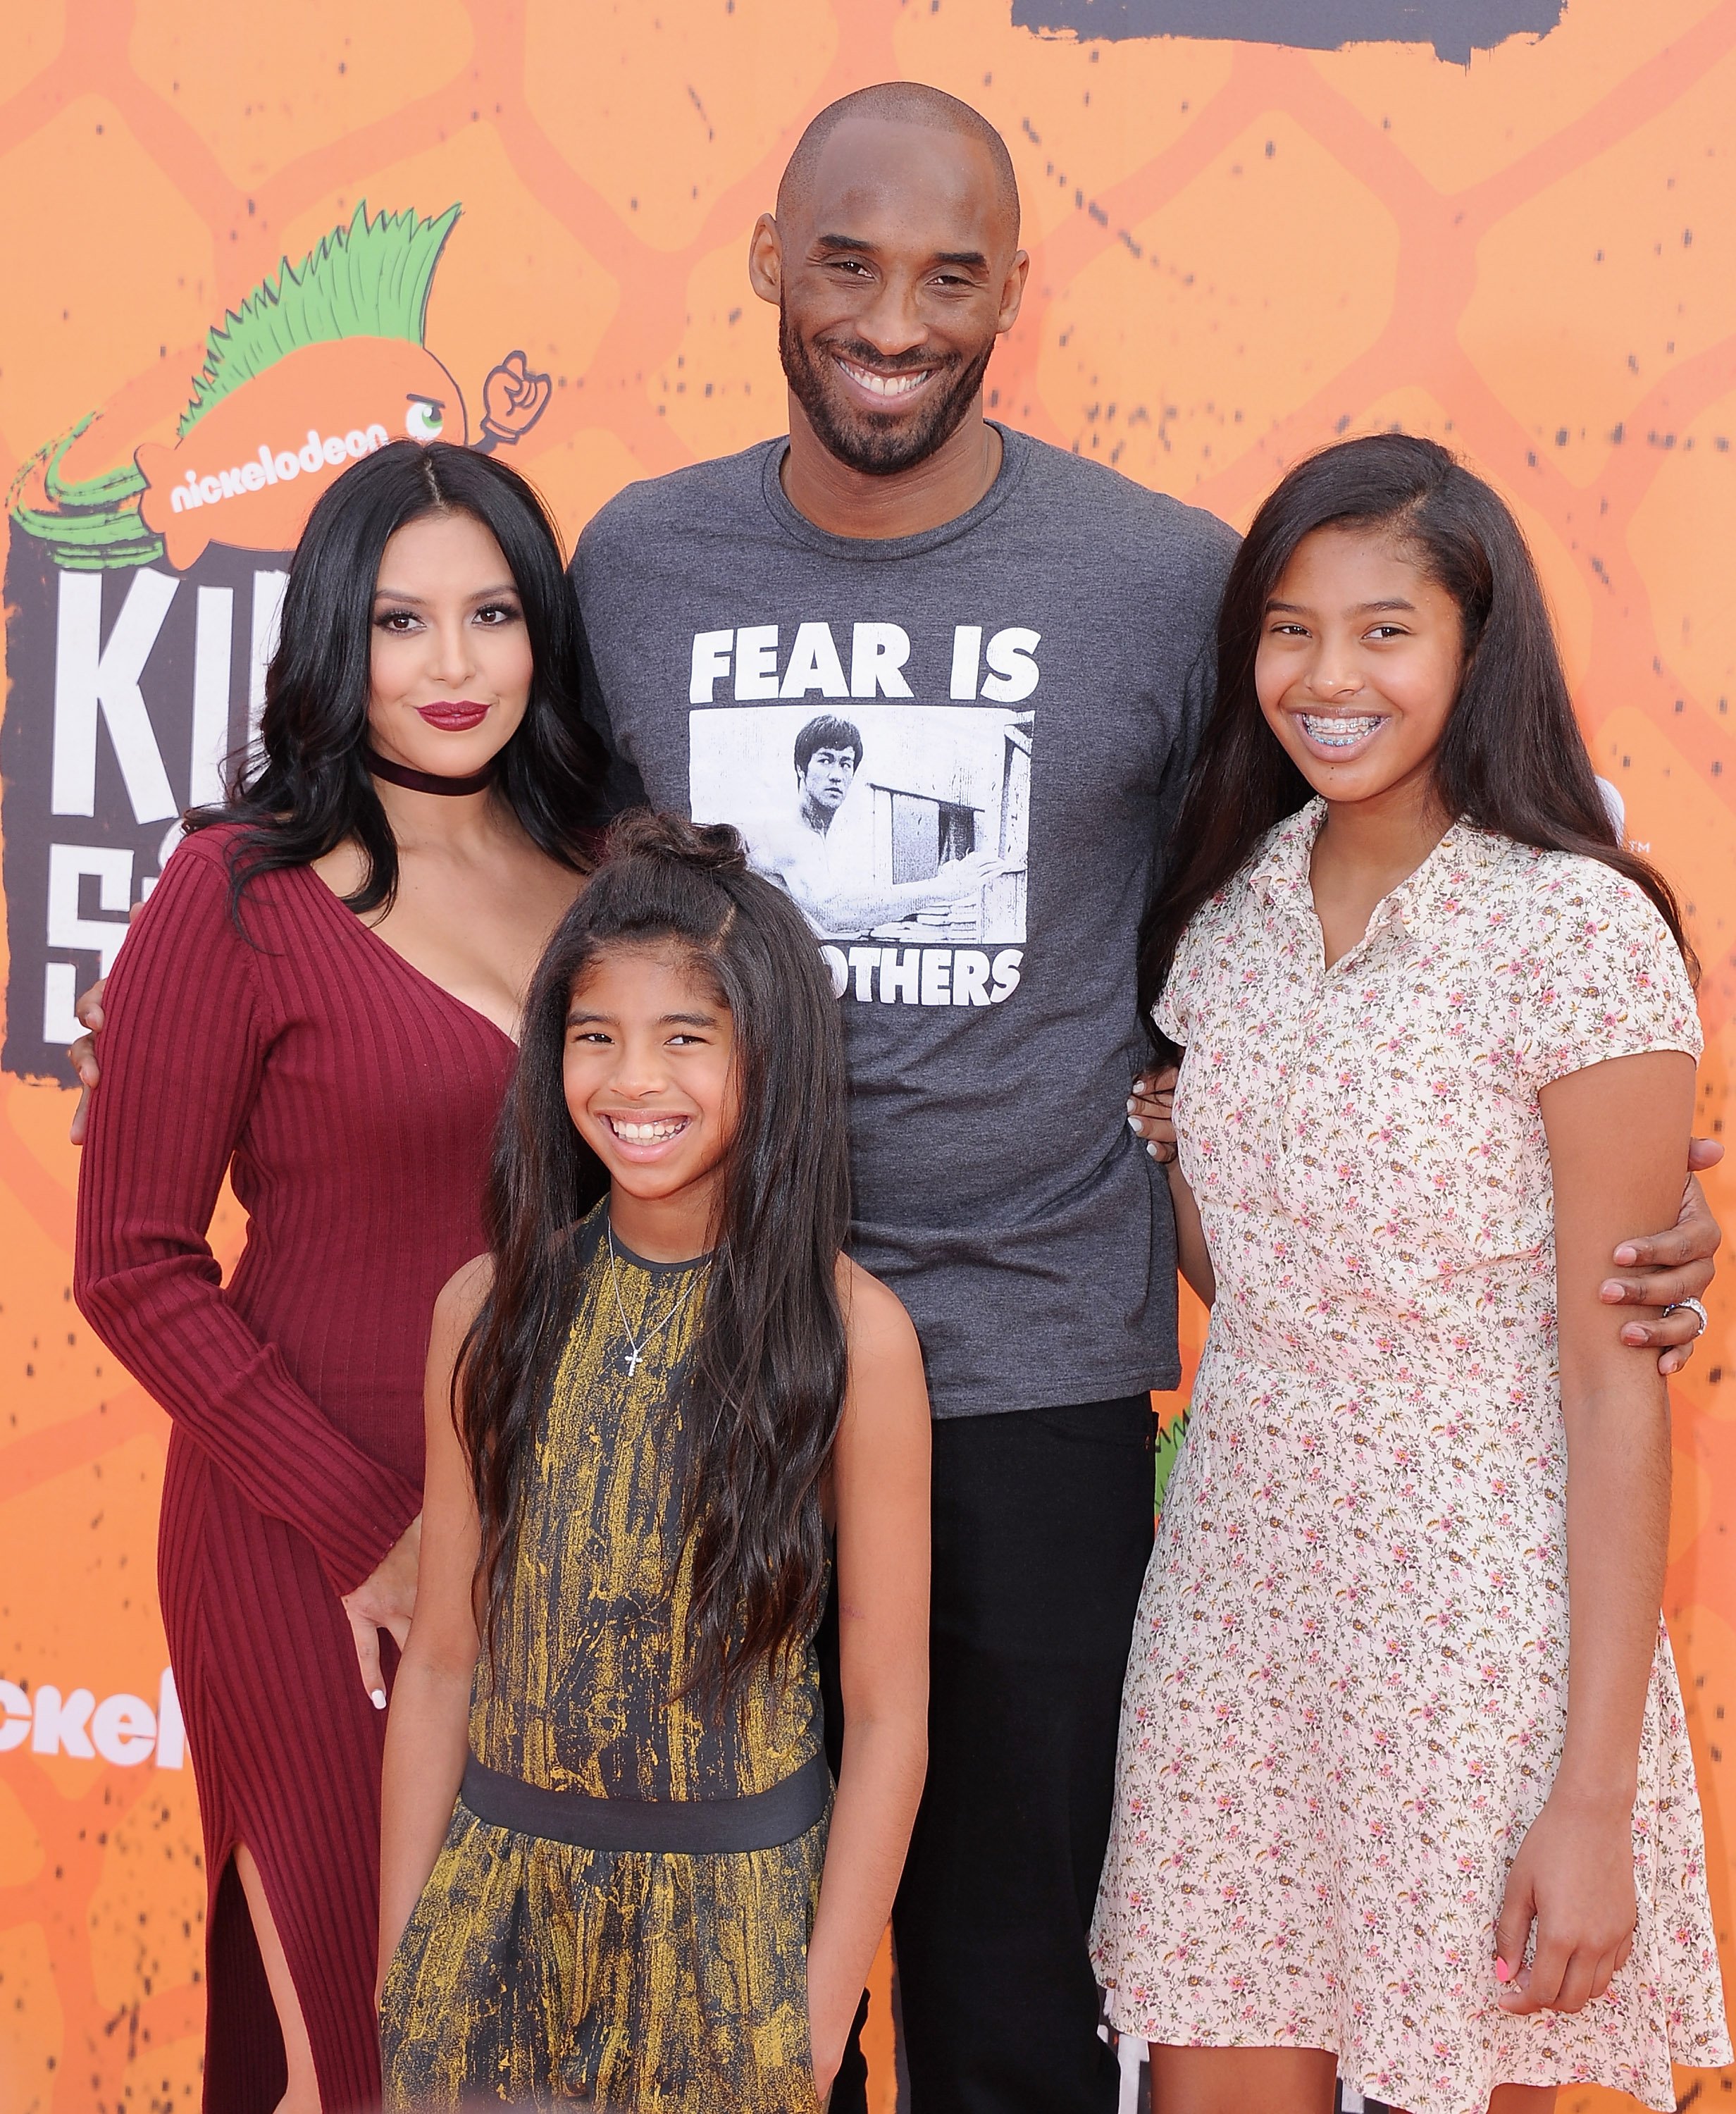 Kobe Bryant, Vanessa Laine Bryant, Gianna Maria-Onore Bryant, and Natalia Diamante Bryant arrive at Nickelodeon Kids' Choice Sports Awards 2016 on July 14, 2016, in Westwood, California. | Source: Getty Images.